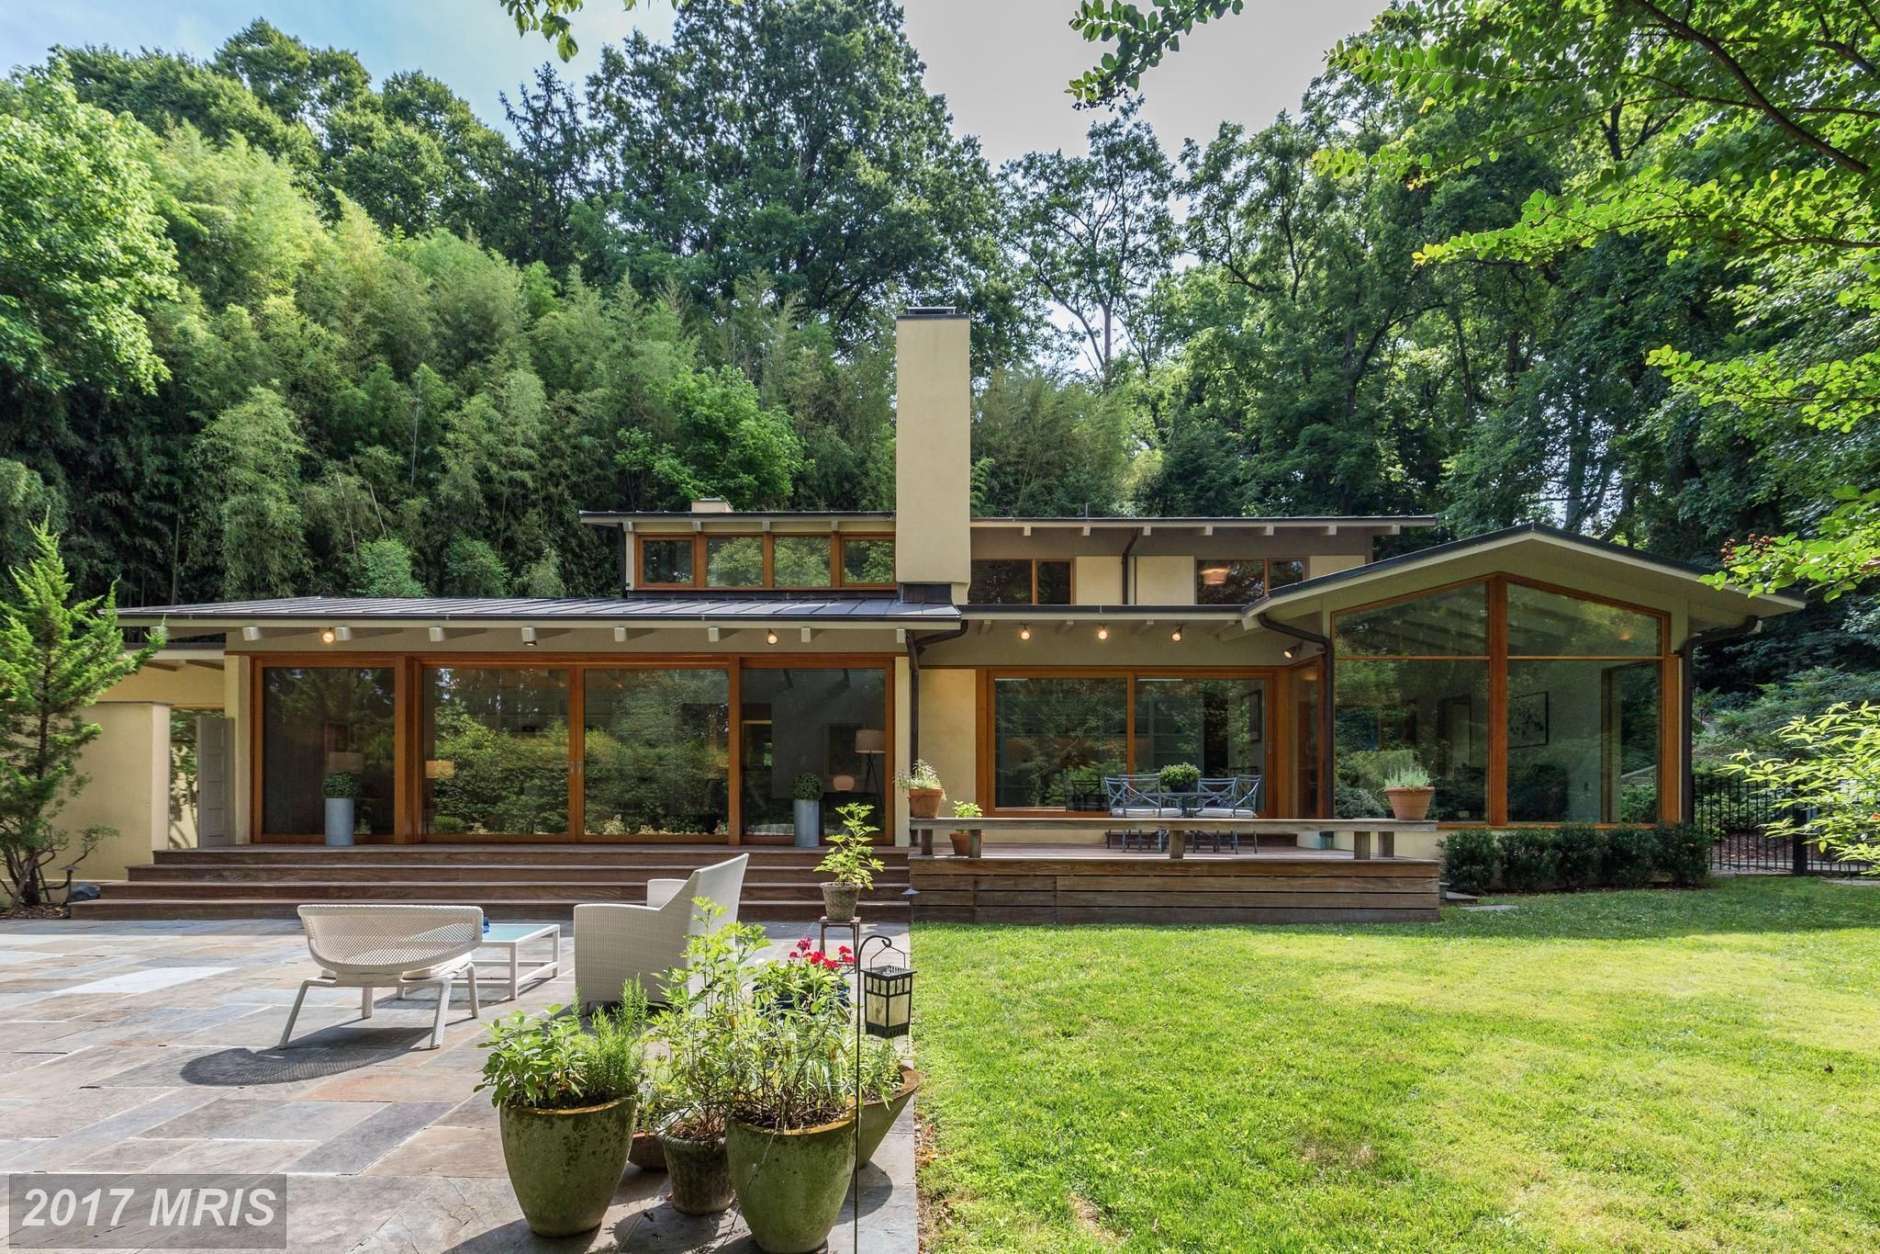 6. $2,800,000
2964 University Terrace NW
Washington, DC
THis 1965 Contemporary house has four bedrooms and four full bathrooms. (Bright MLS)